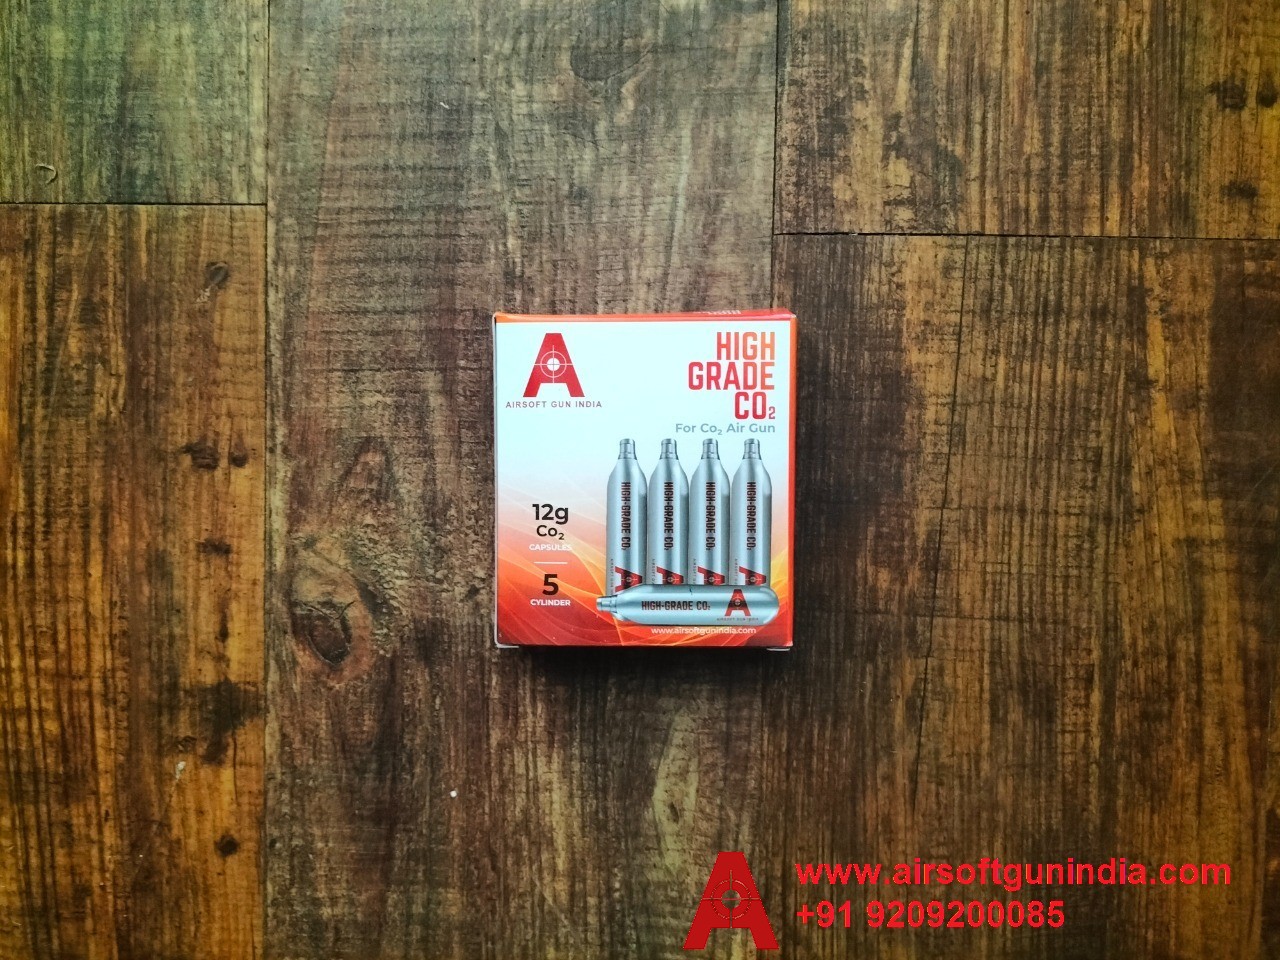 12 Gram Co2 Cartridges Pack Of 10 By Airsoft Gun India For Co2 Guns